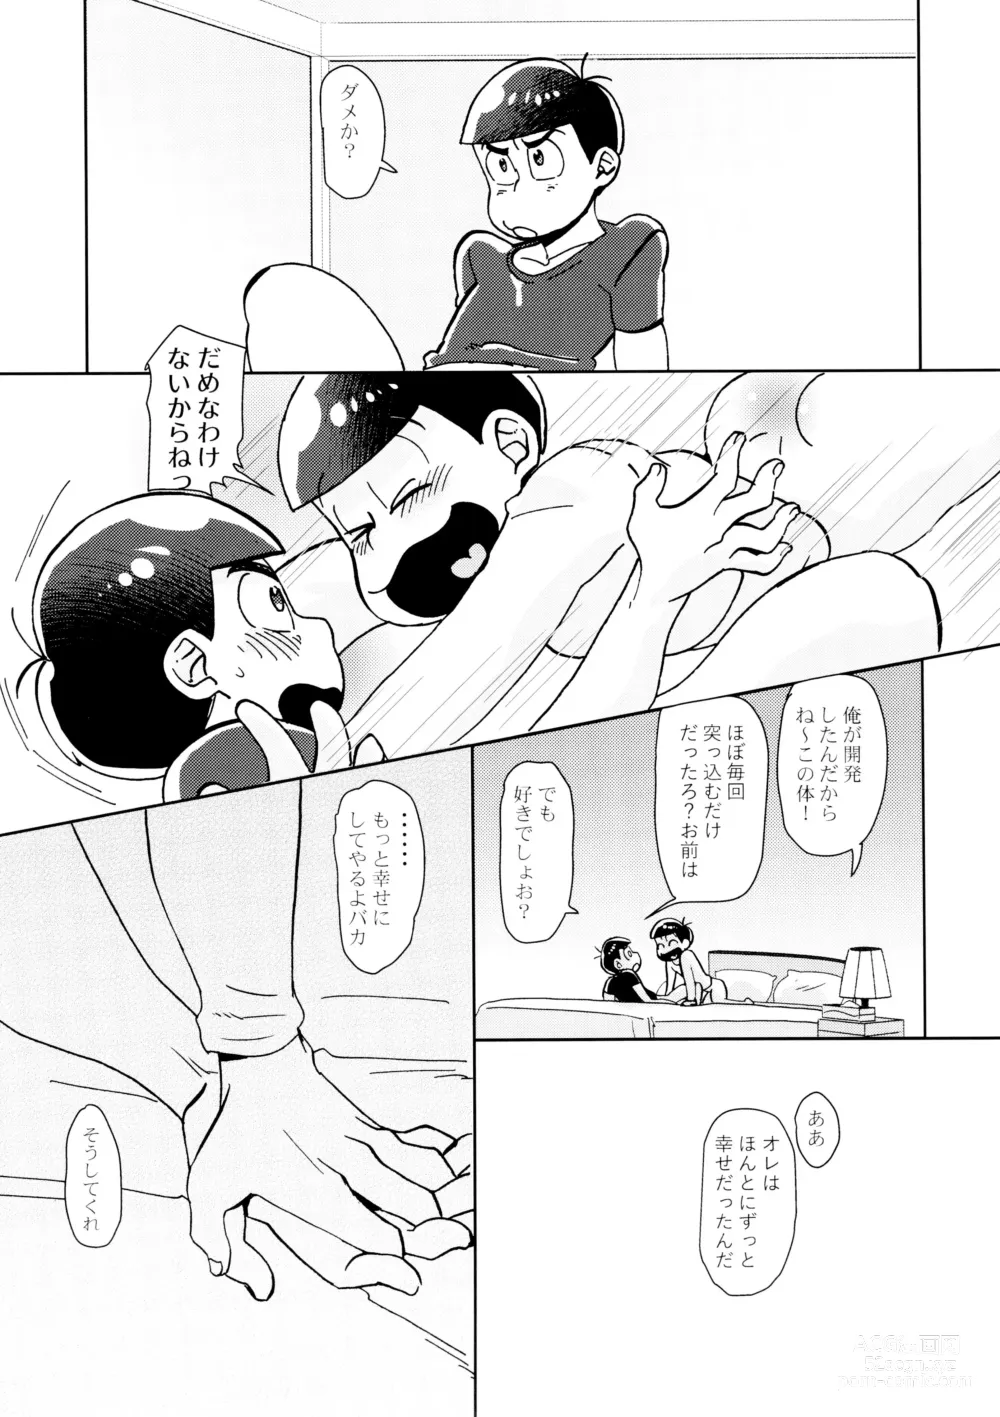 Page 31 of doujinshi Easy and Blue